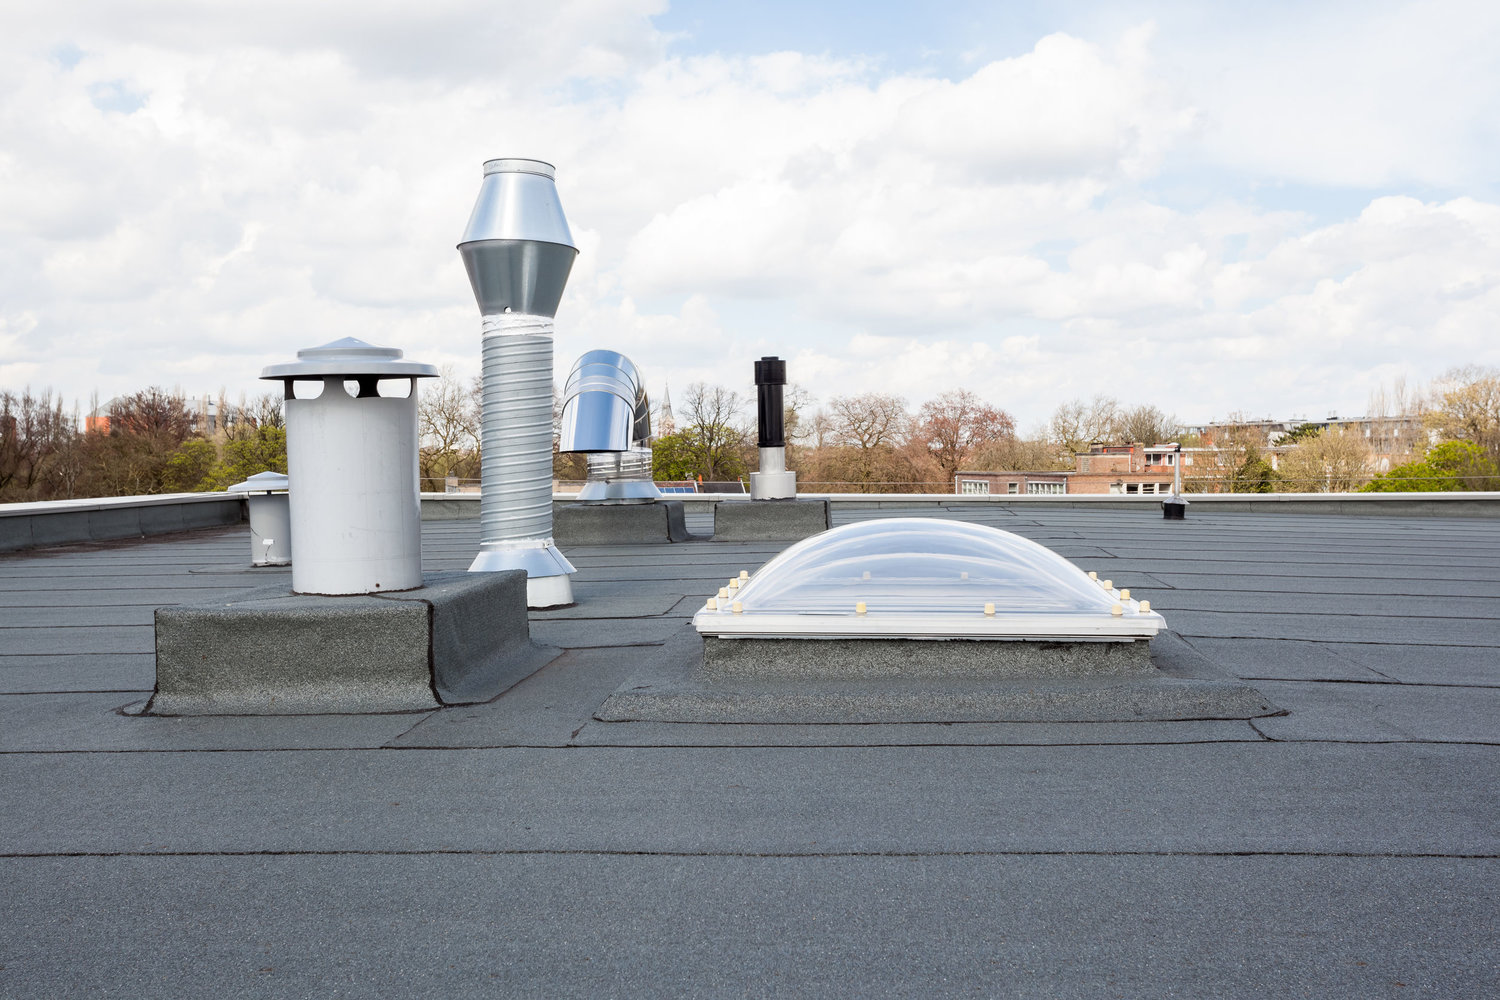 Commercial Flat Roof Types: Which is the Best Choice? — Rainshield